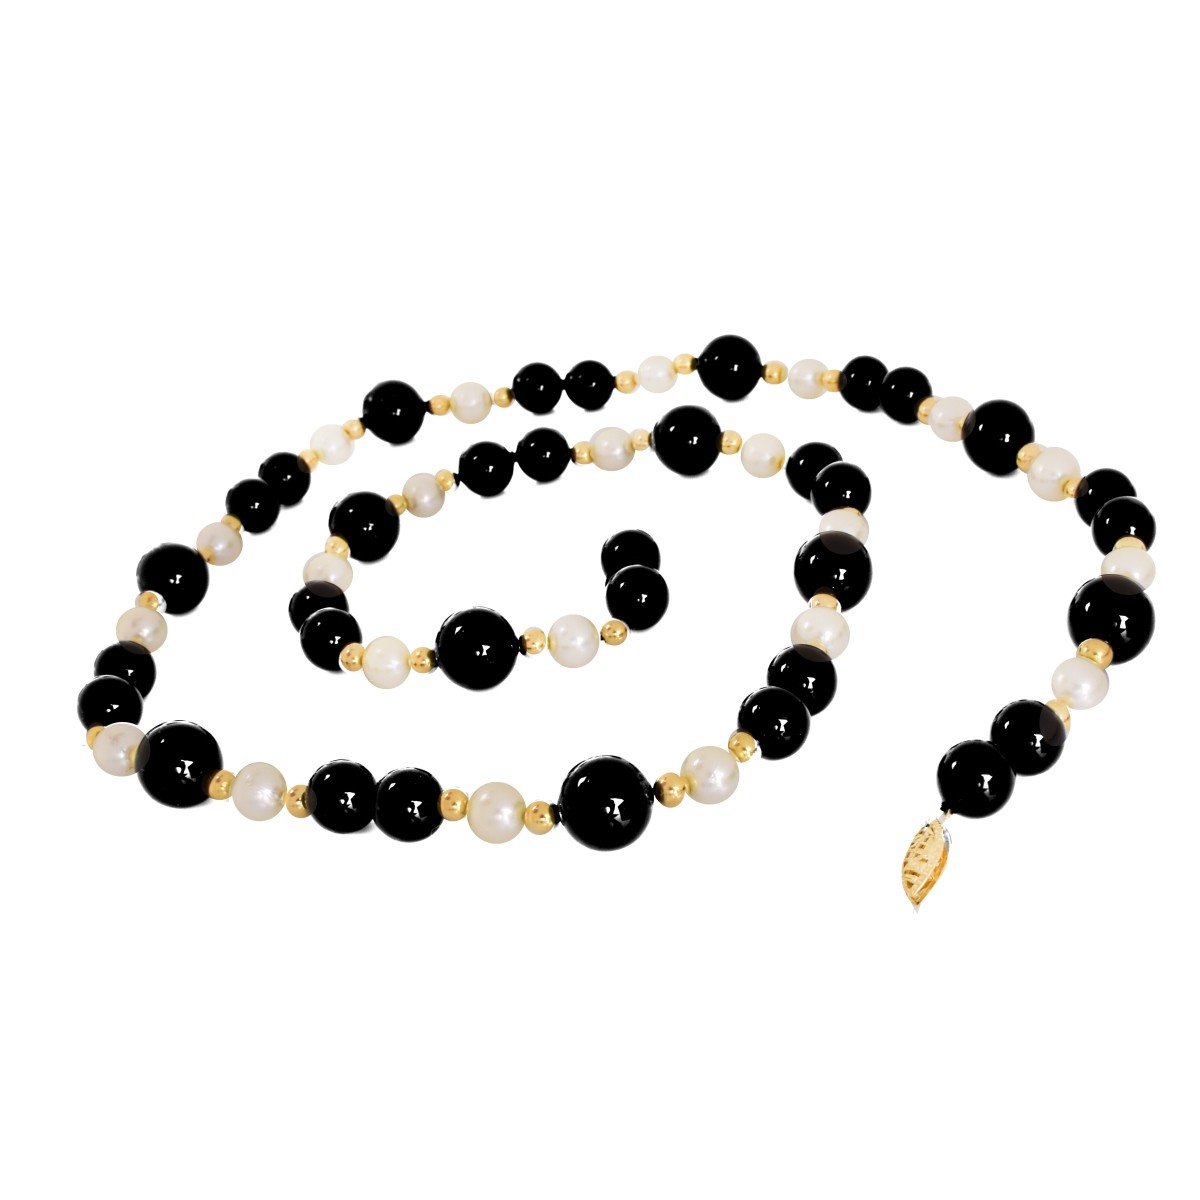 Vintage 14K Gold, Onyx and Pearl Necklace